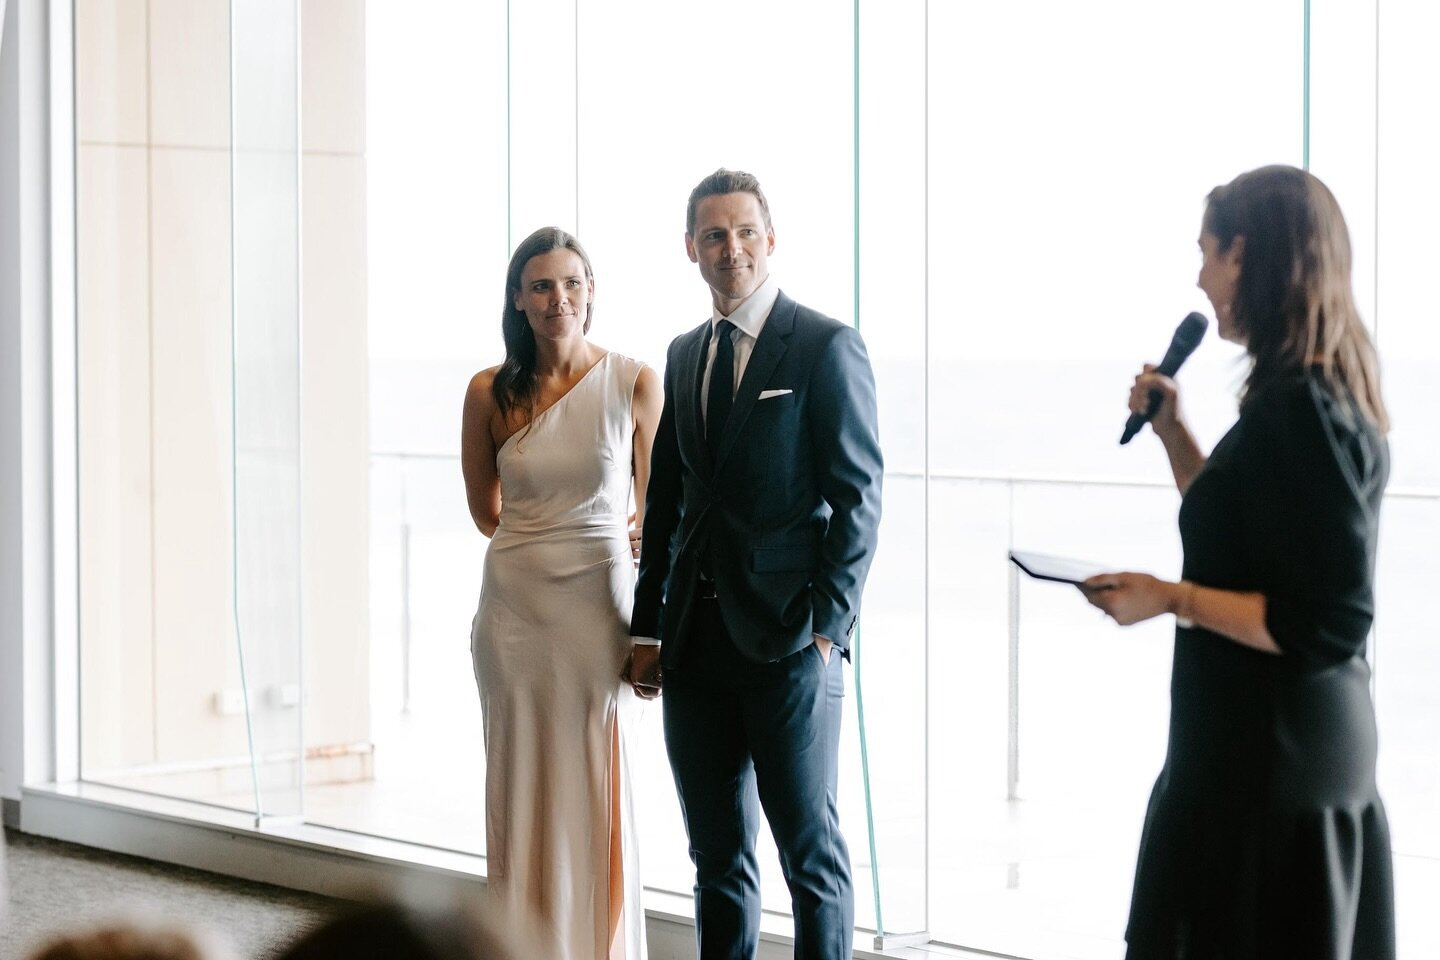 Why I choose to stand on the sidelines during your ceremony. 

At the heart of it all, your wedding is YOUR love story. It&rsquo;s all about you and your partner - I&rsquo;m just there to sprinkle some legal magic and turn your celebration into an 